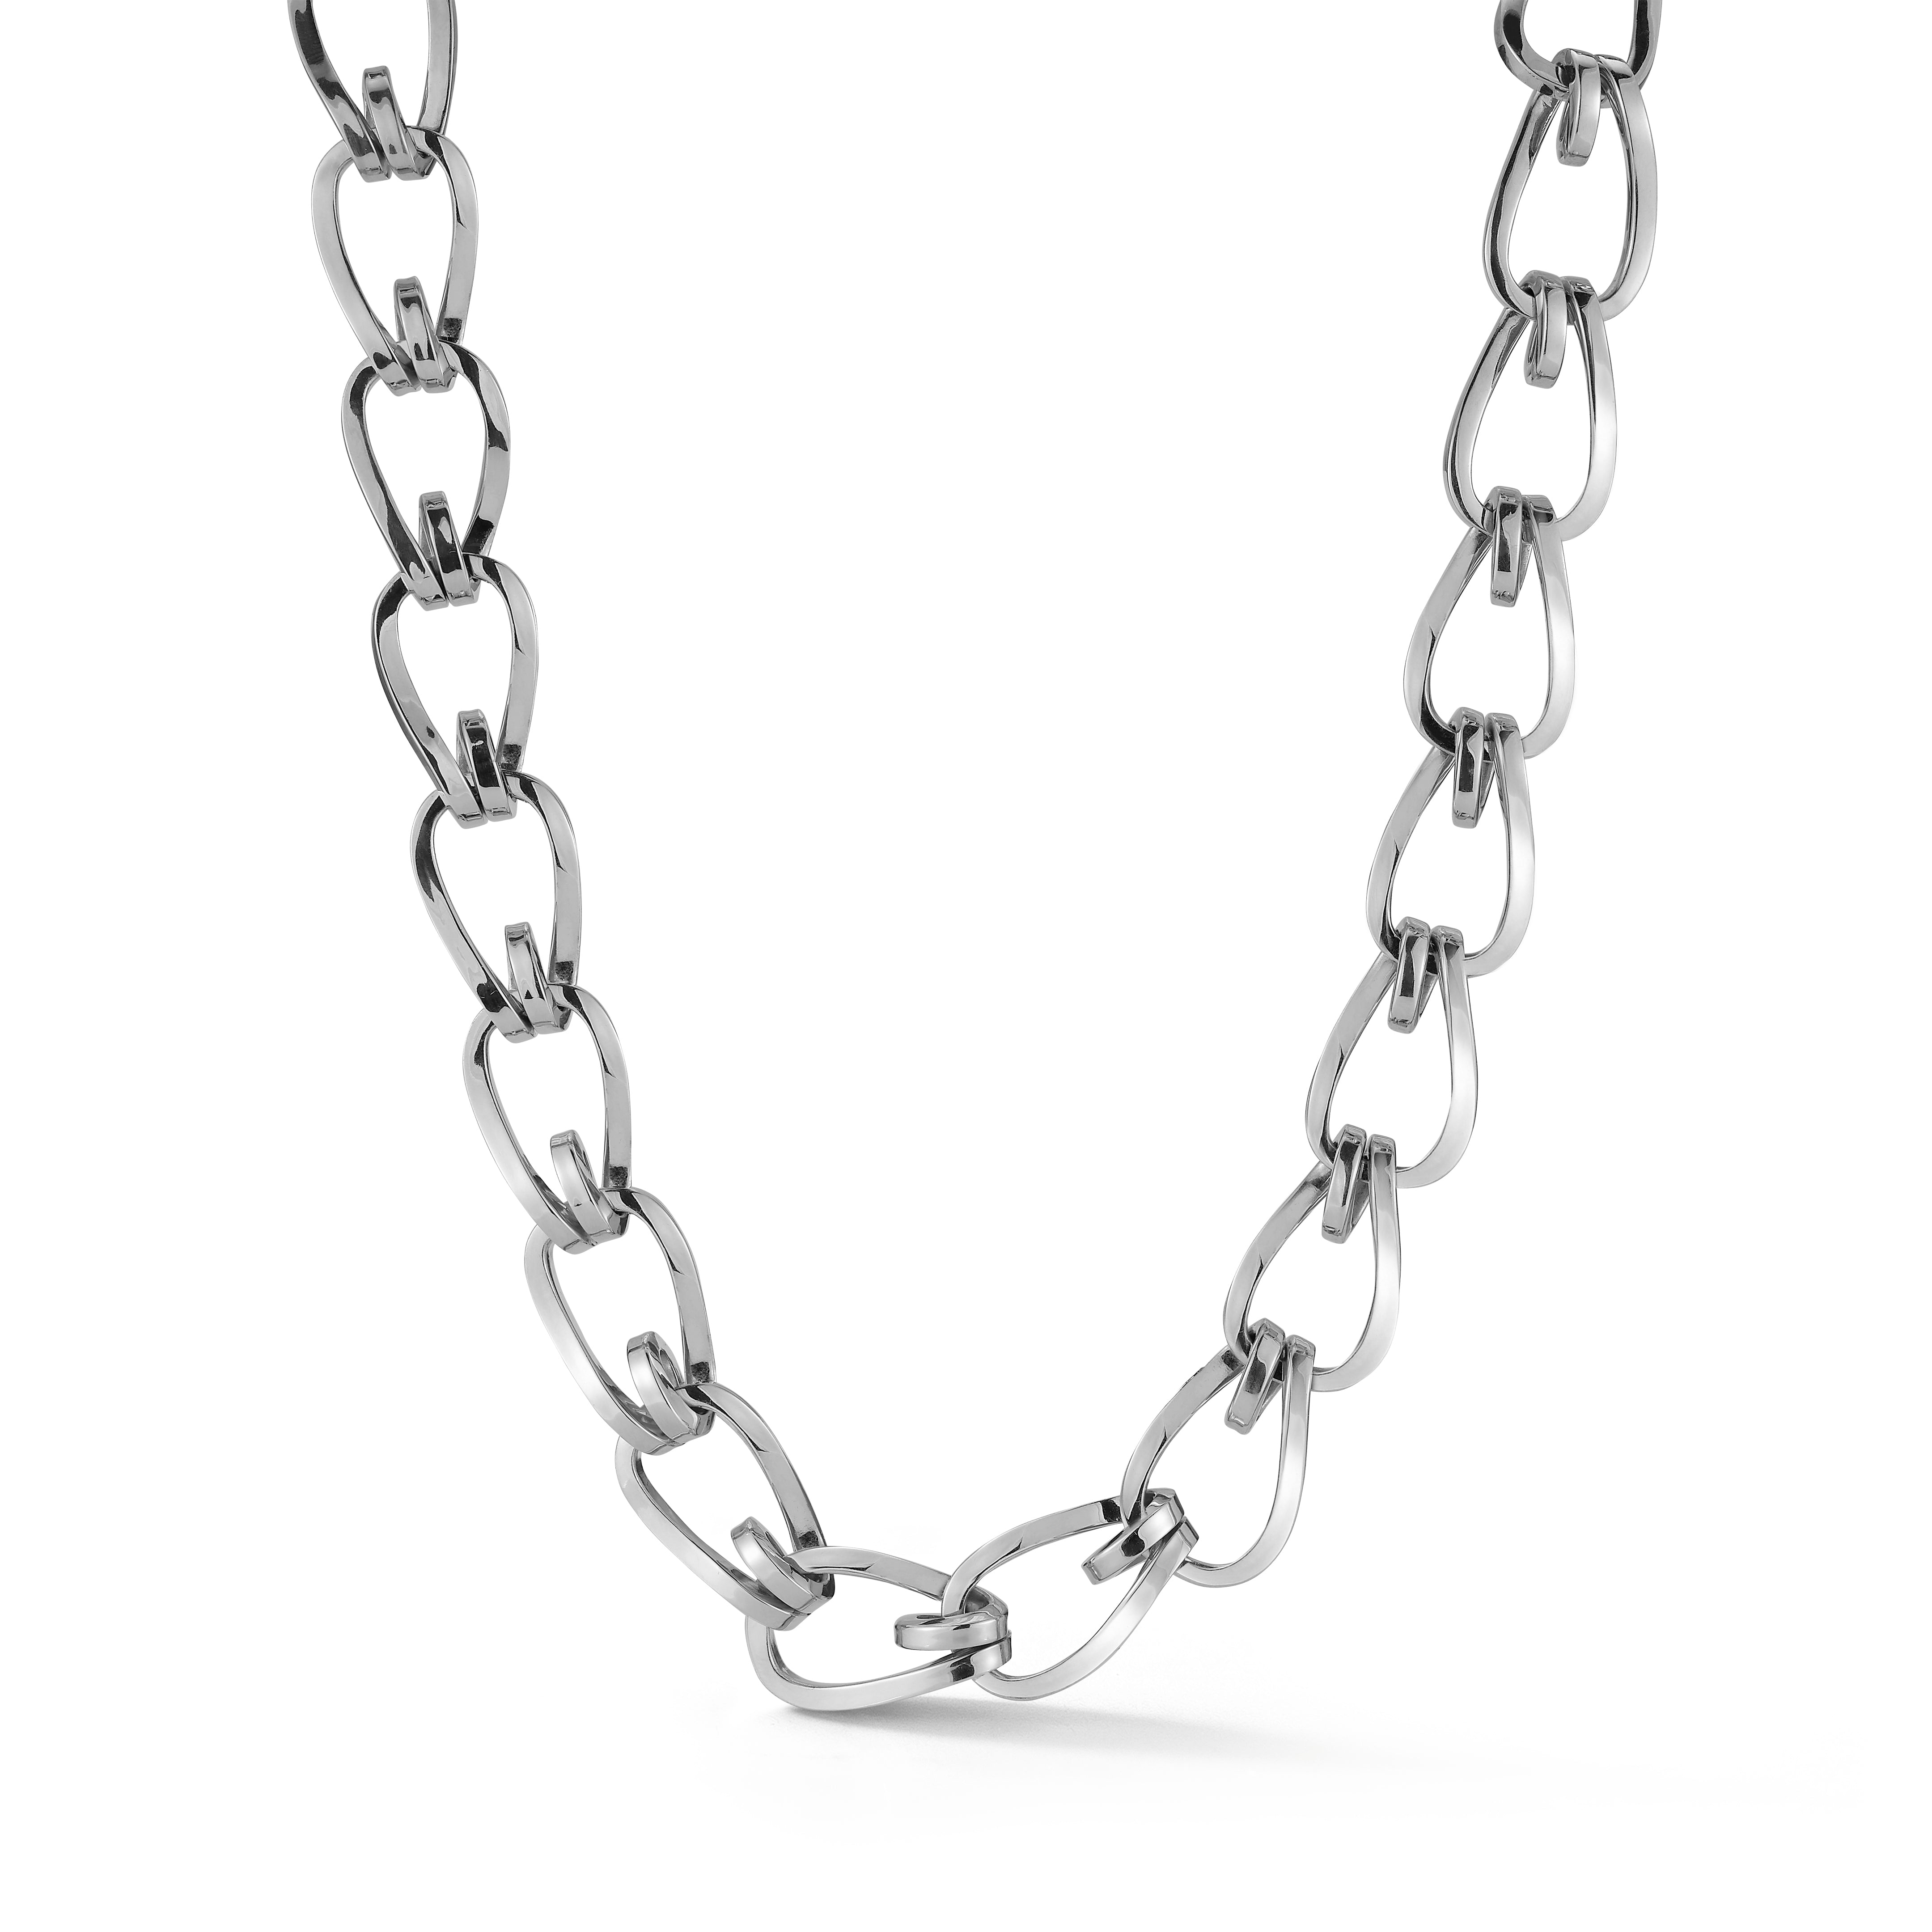 Large Daytona Chain Necklace in White Gold